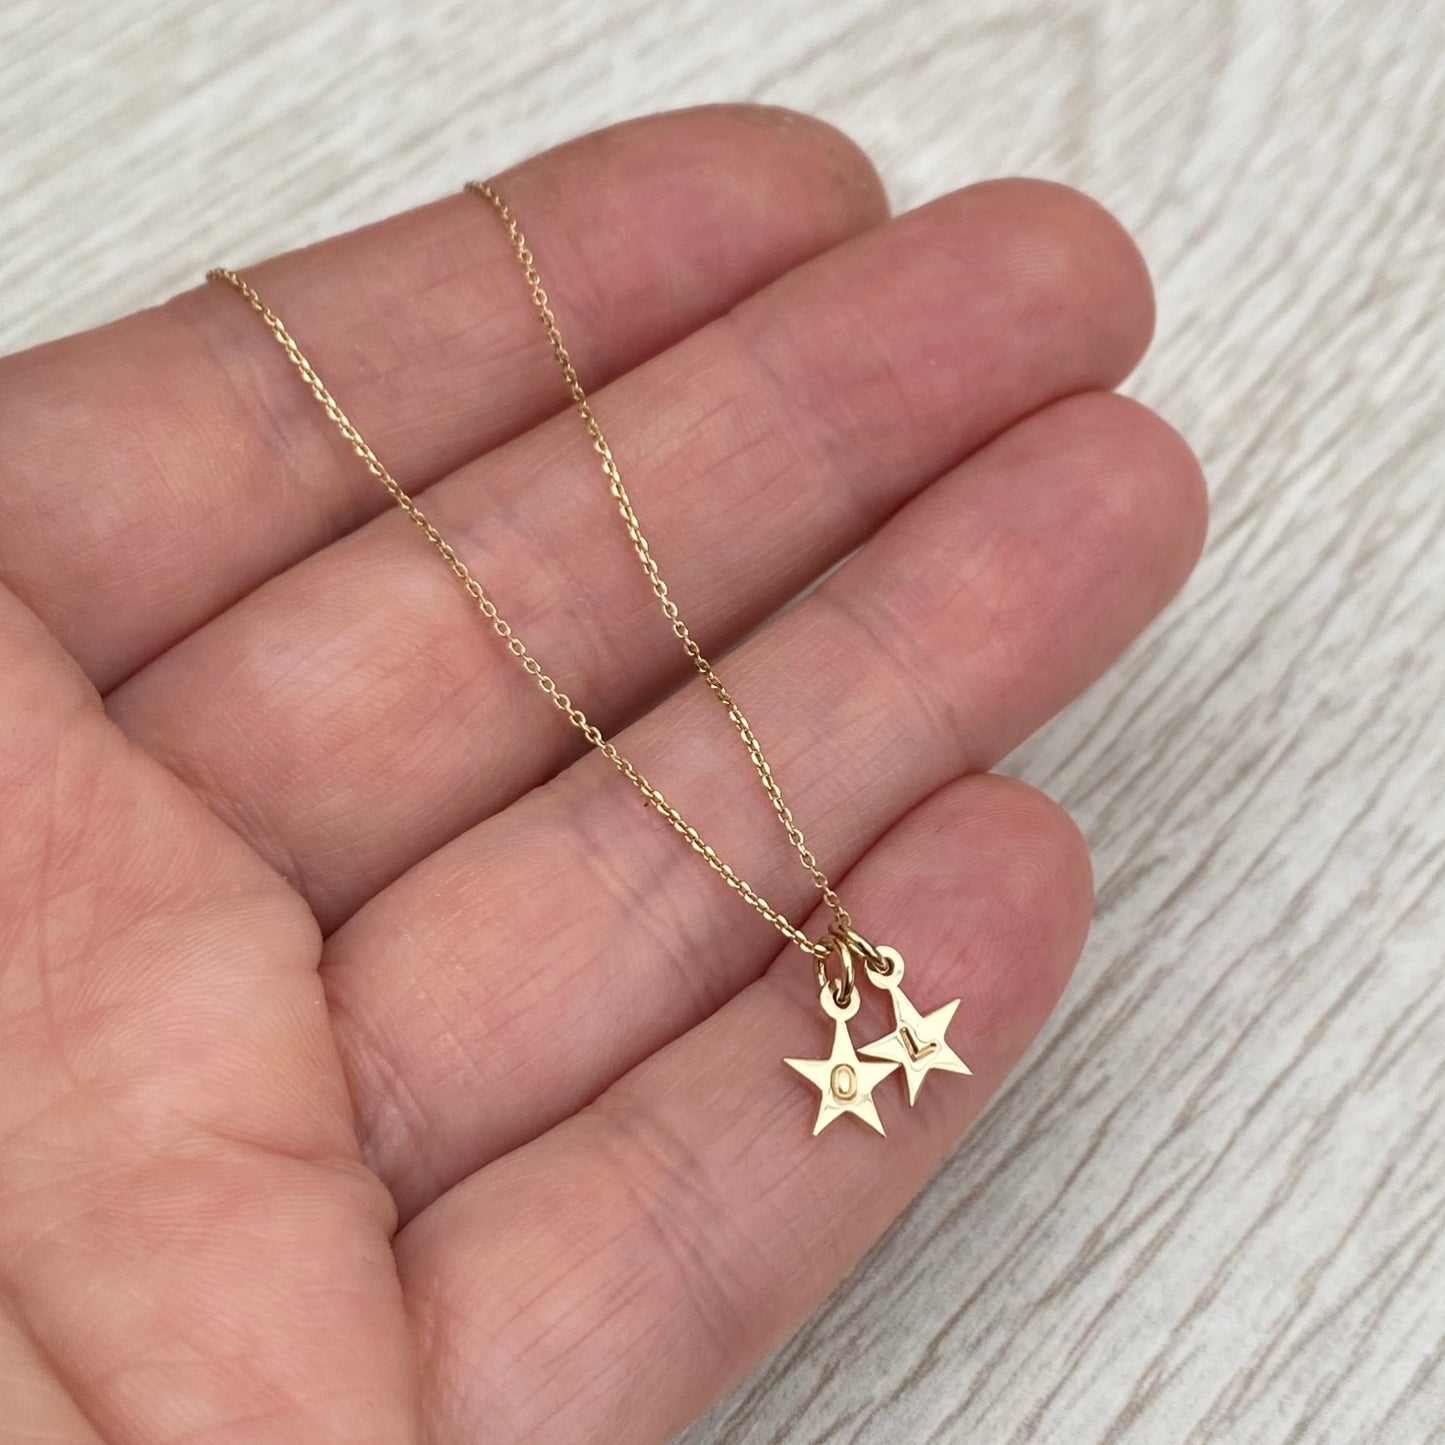 9ct solid yellow gold teeny-weeny letter star charm pendant and chain